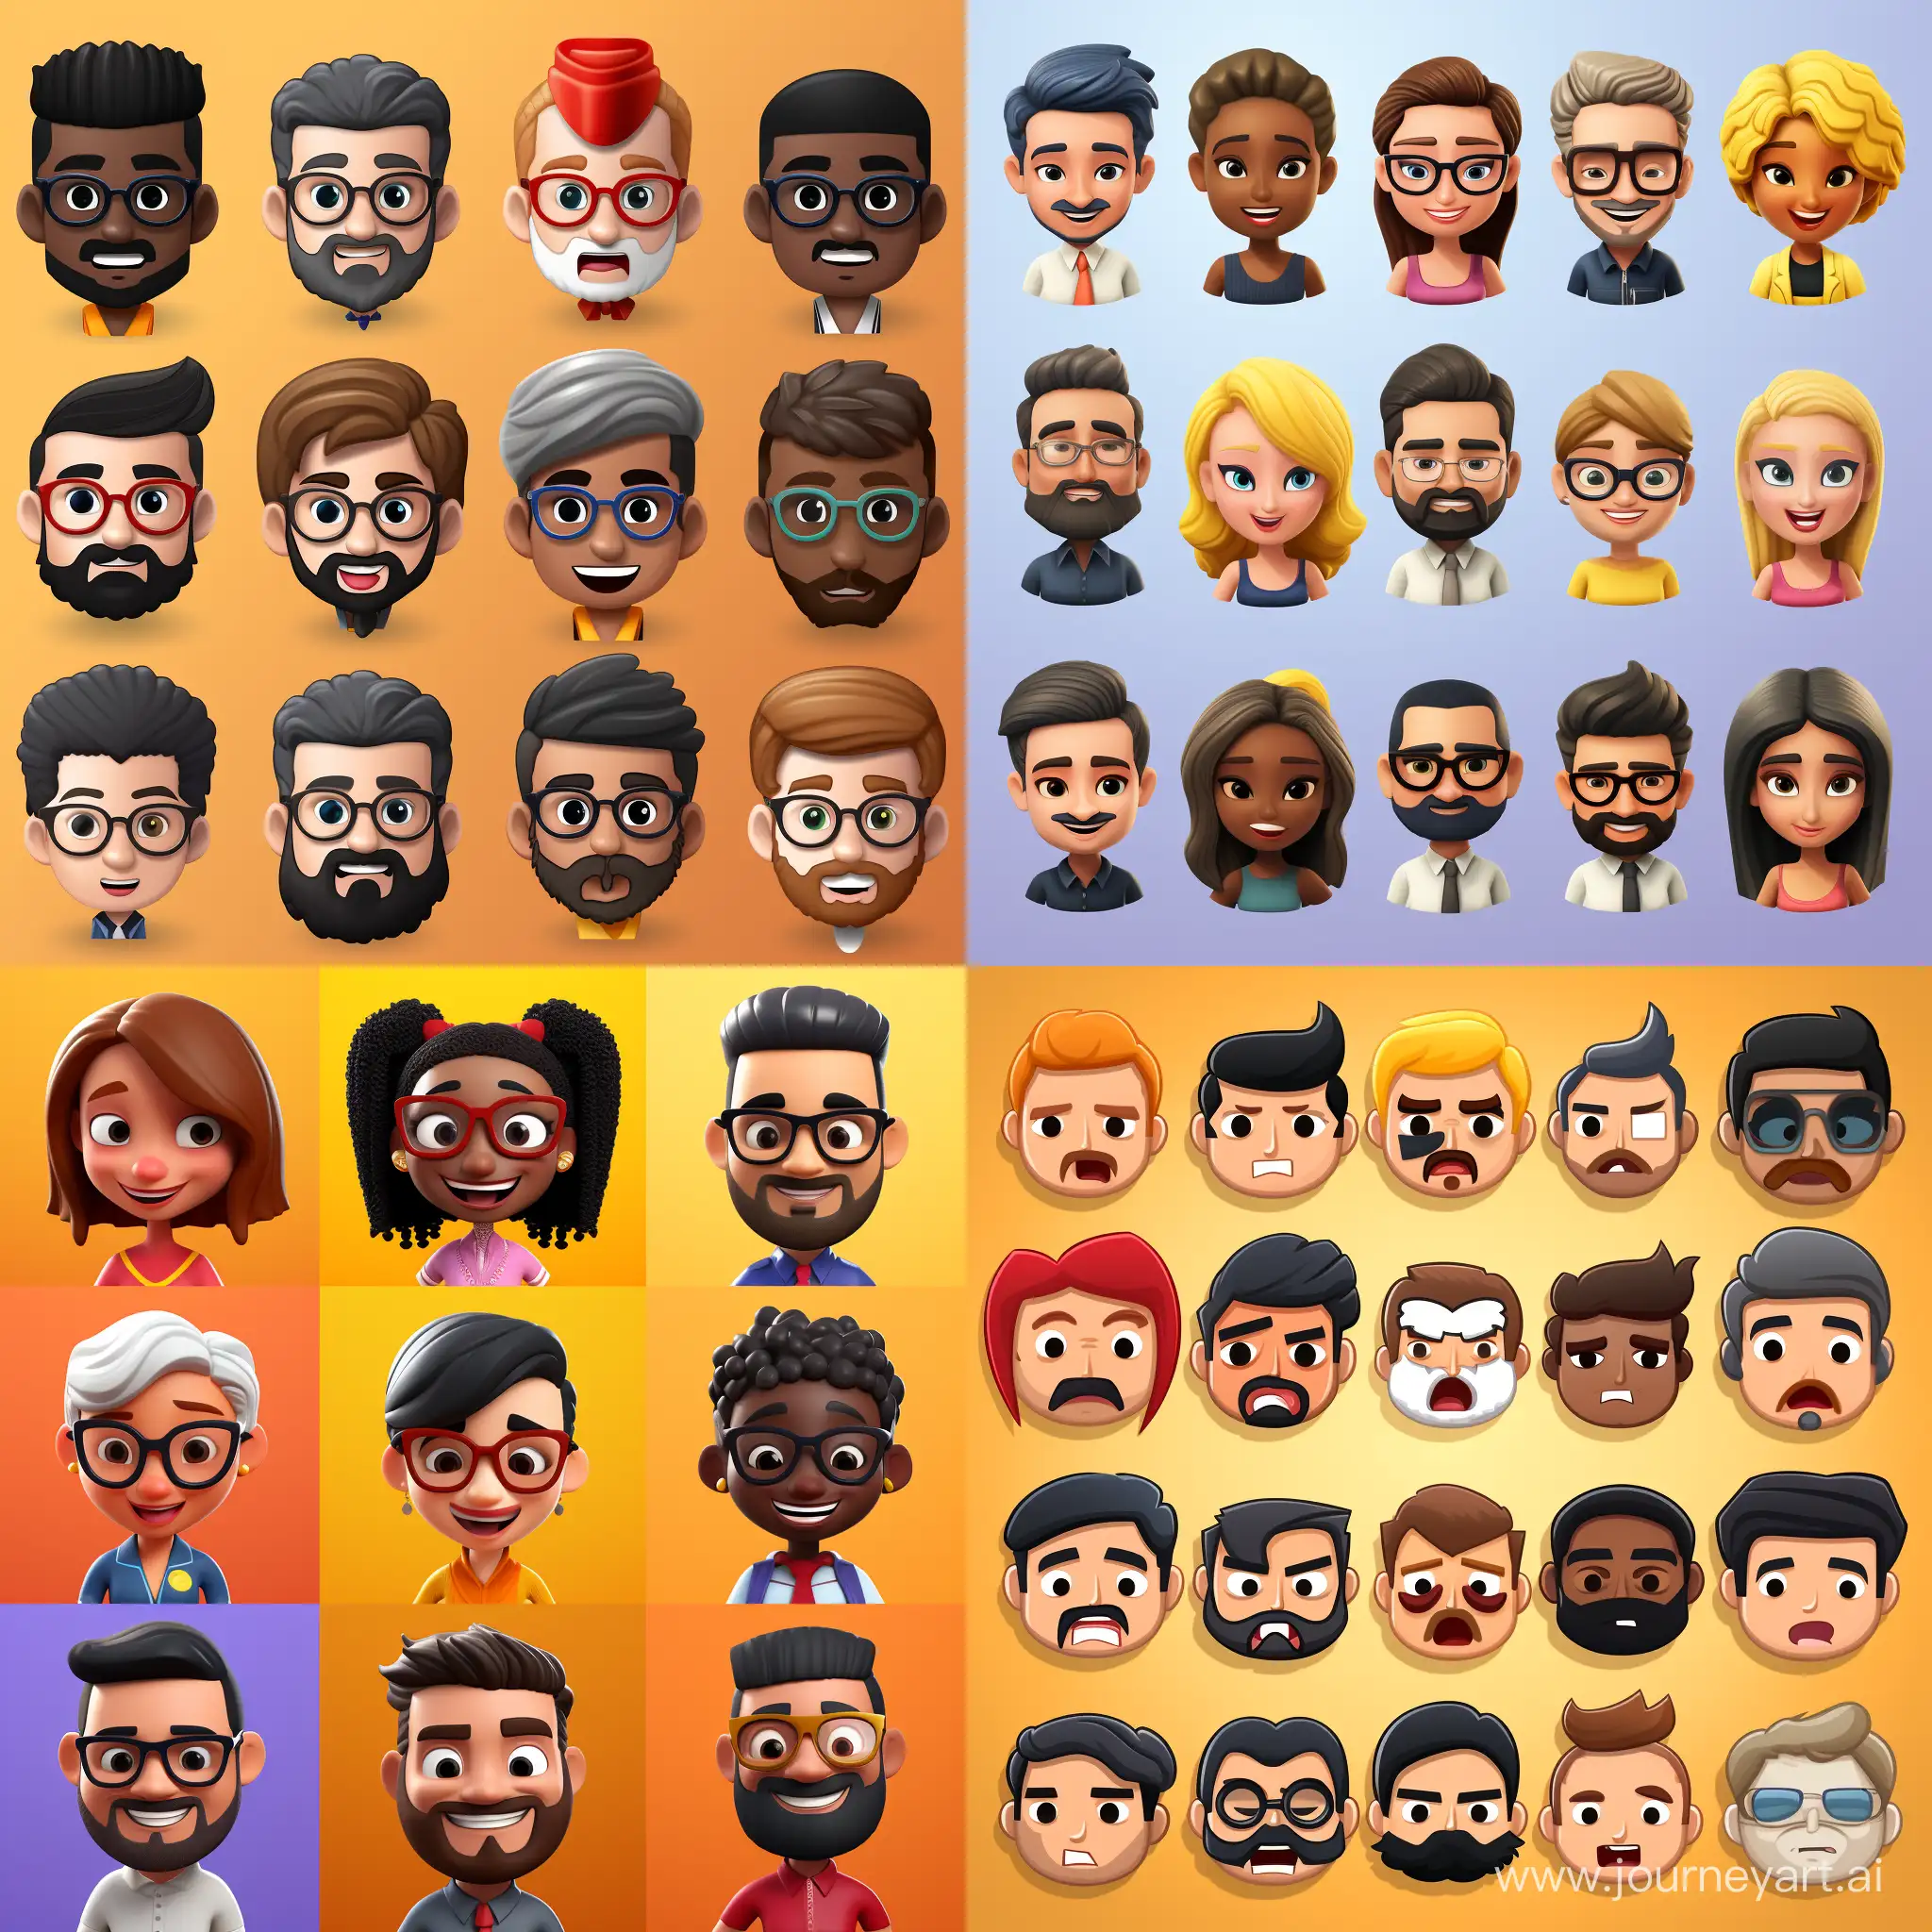 create custom emojis pack for your character